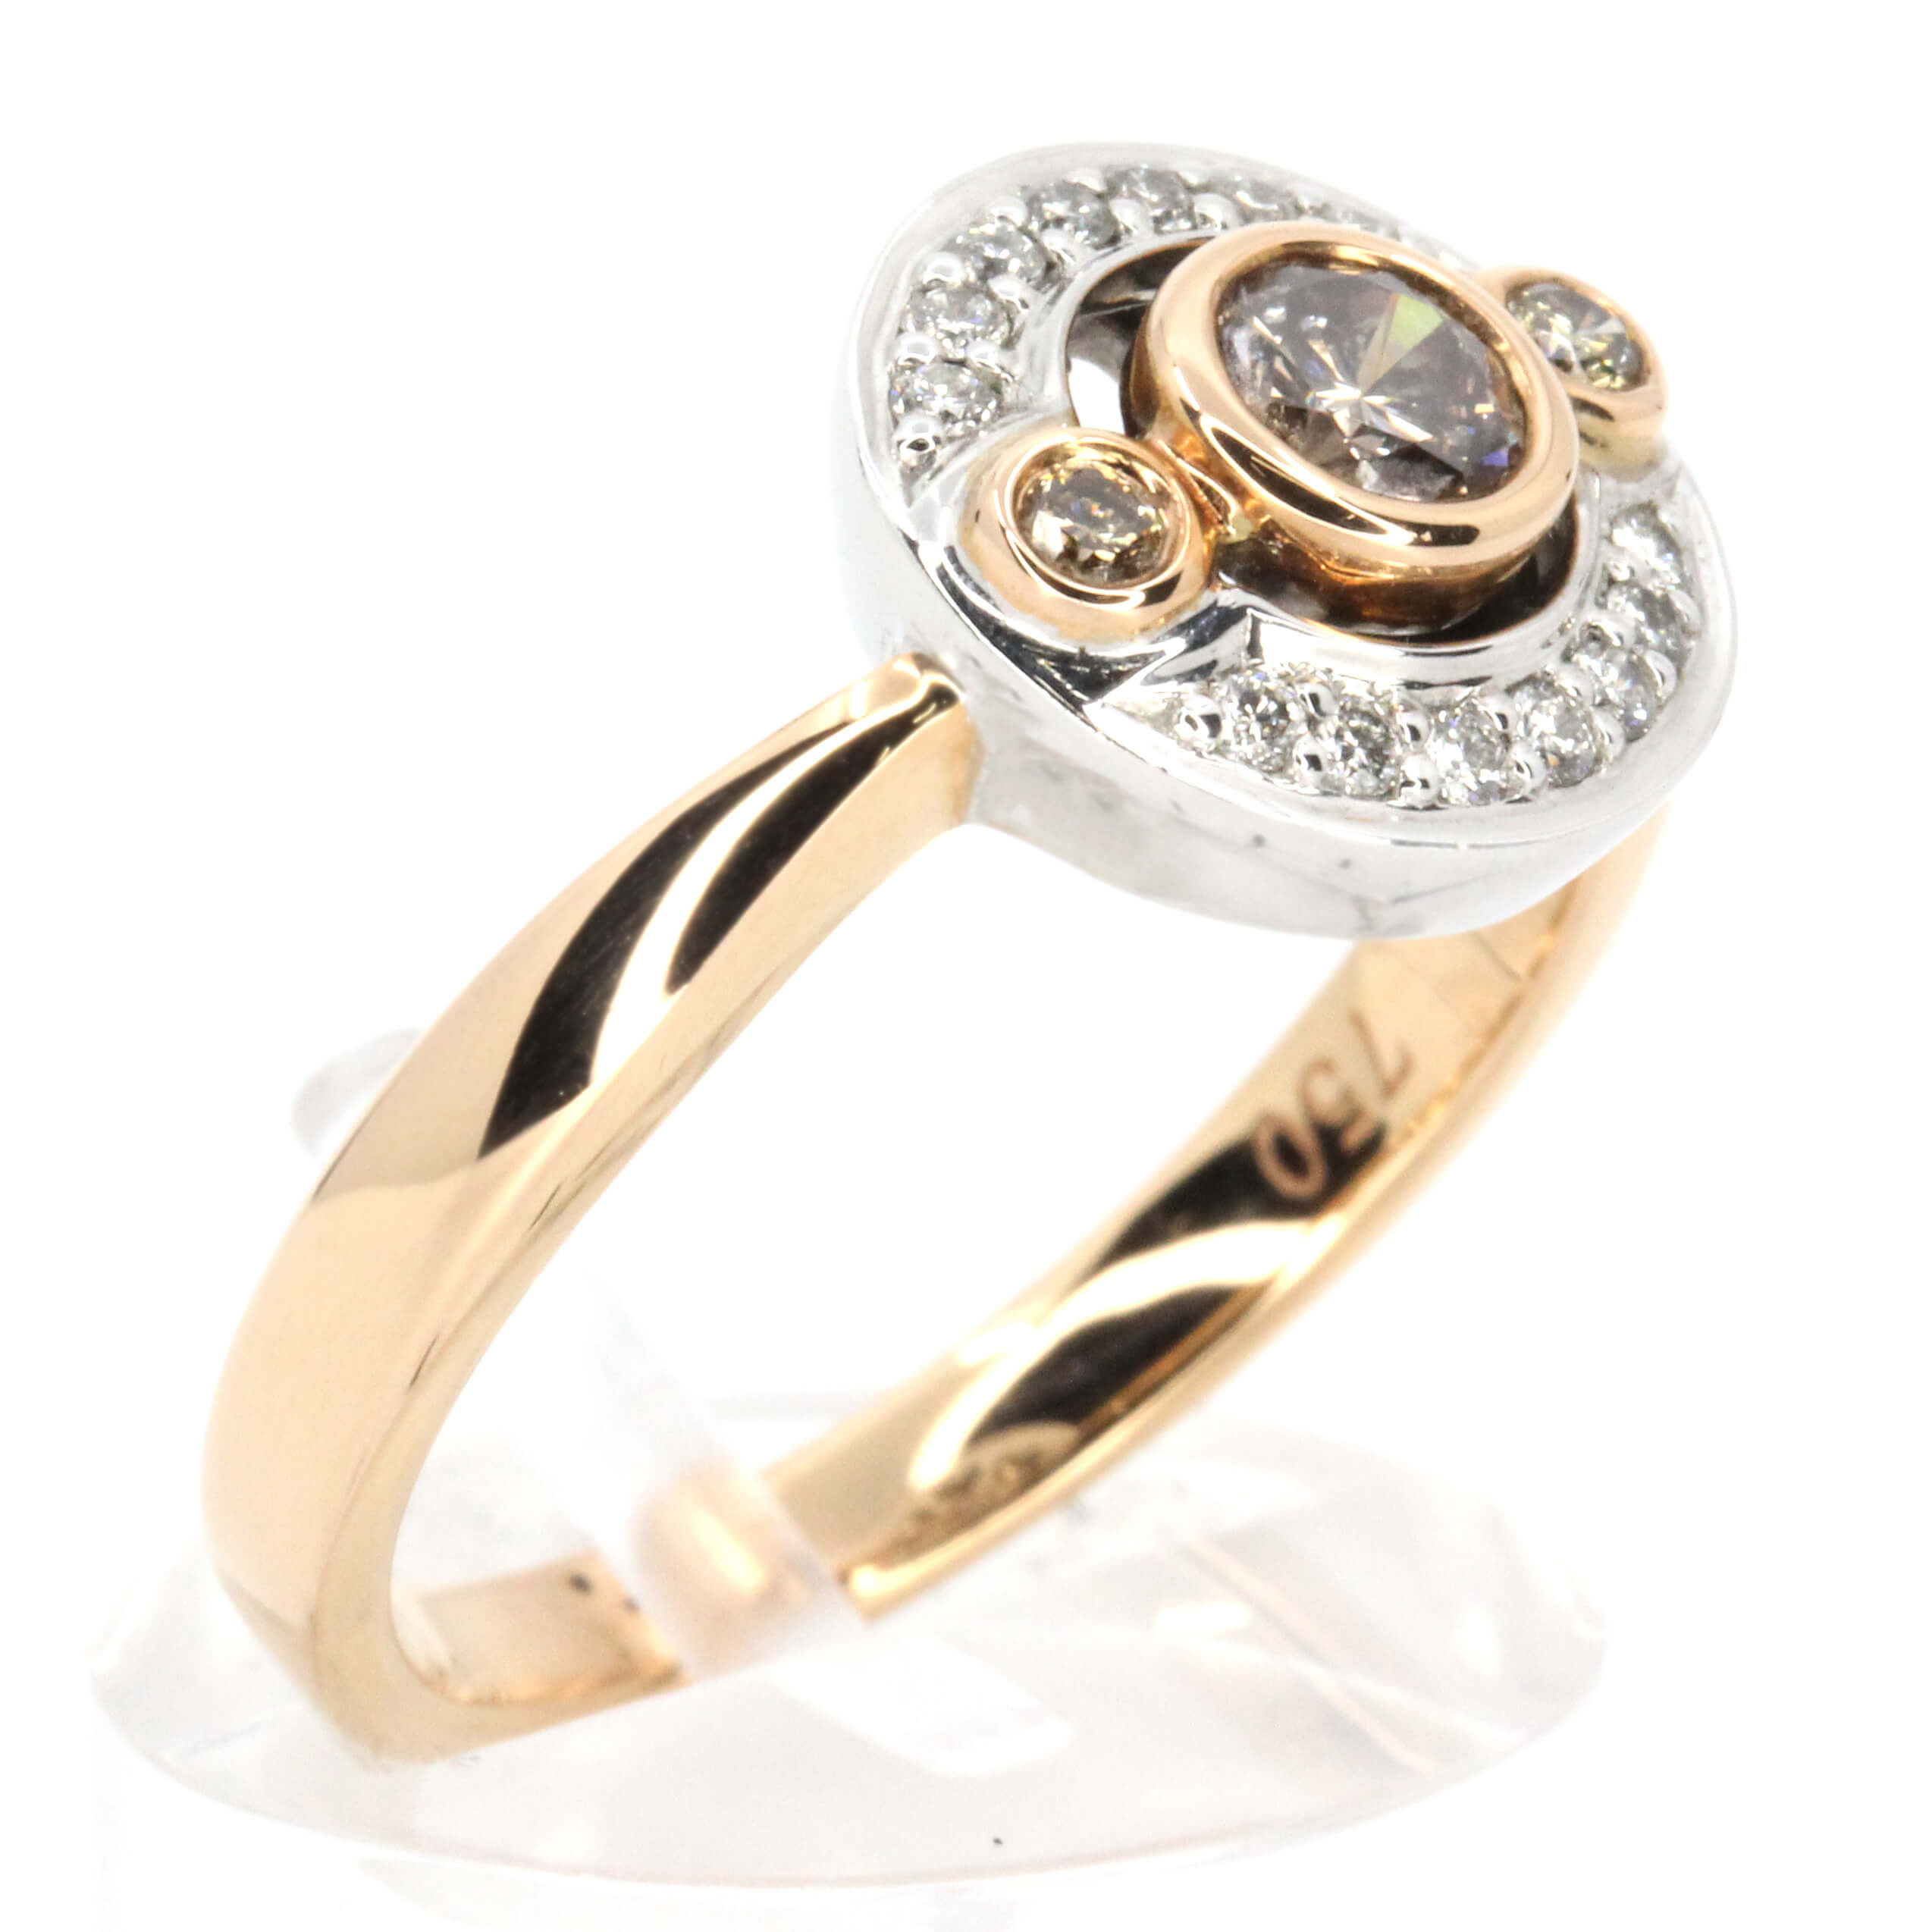 Champagne Diamond Ring with Diamonds set in 18ct Rose/White Gold | All Gem Jewellers